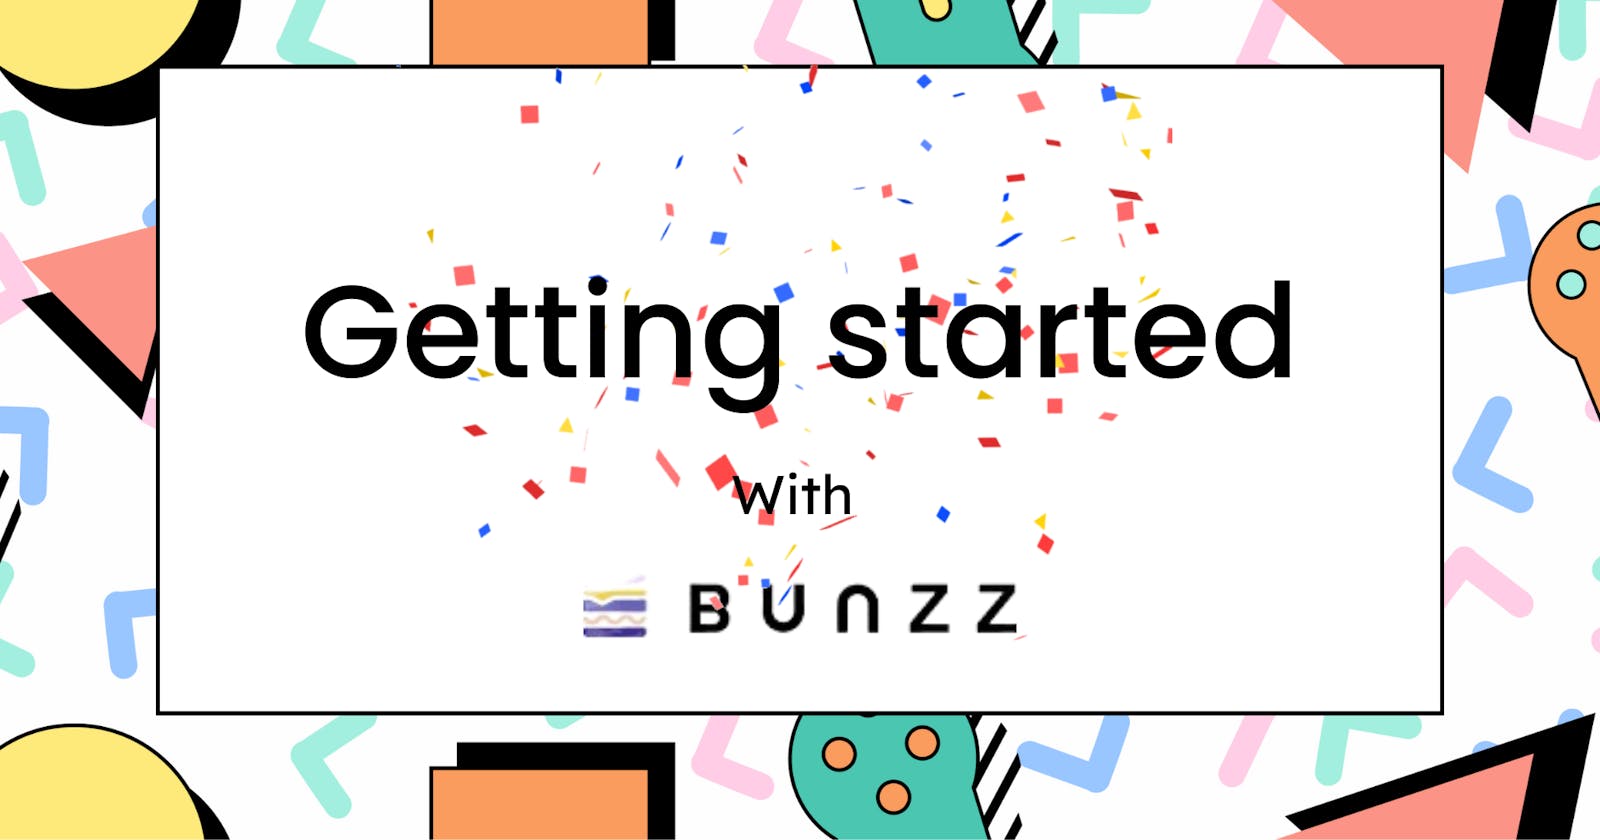 Getting Started with Bunzz